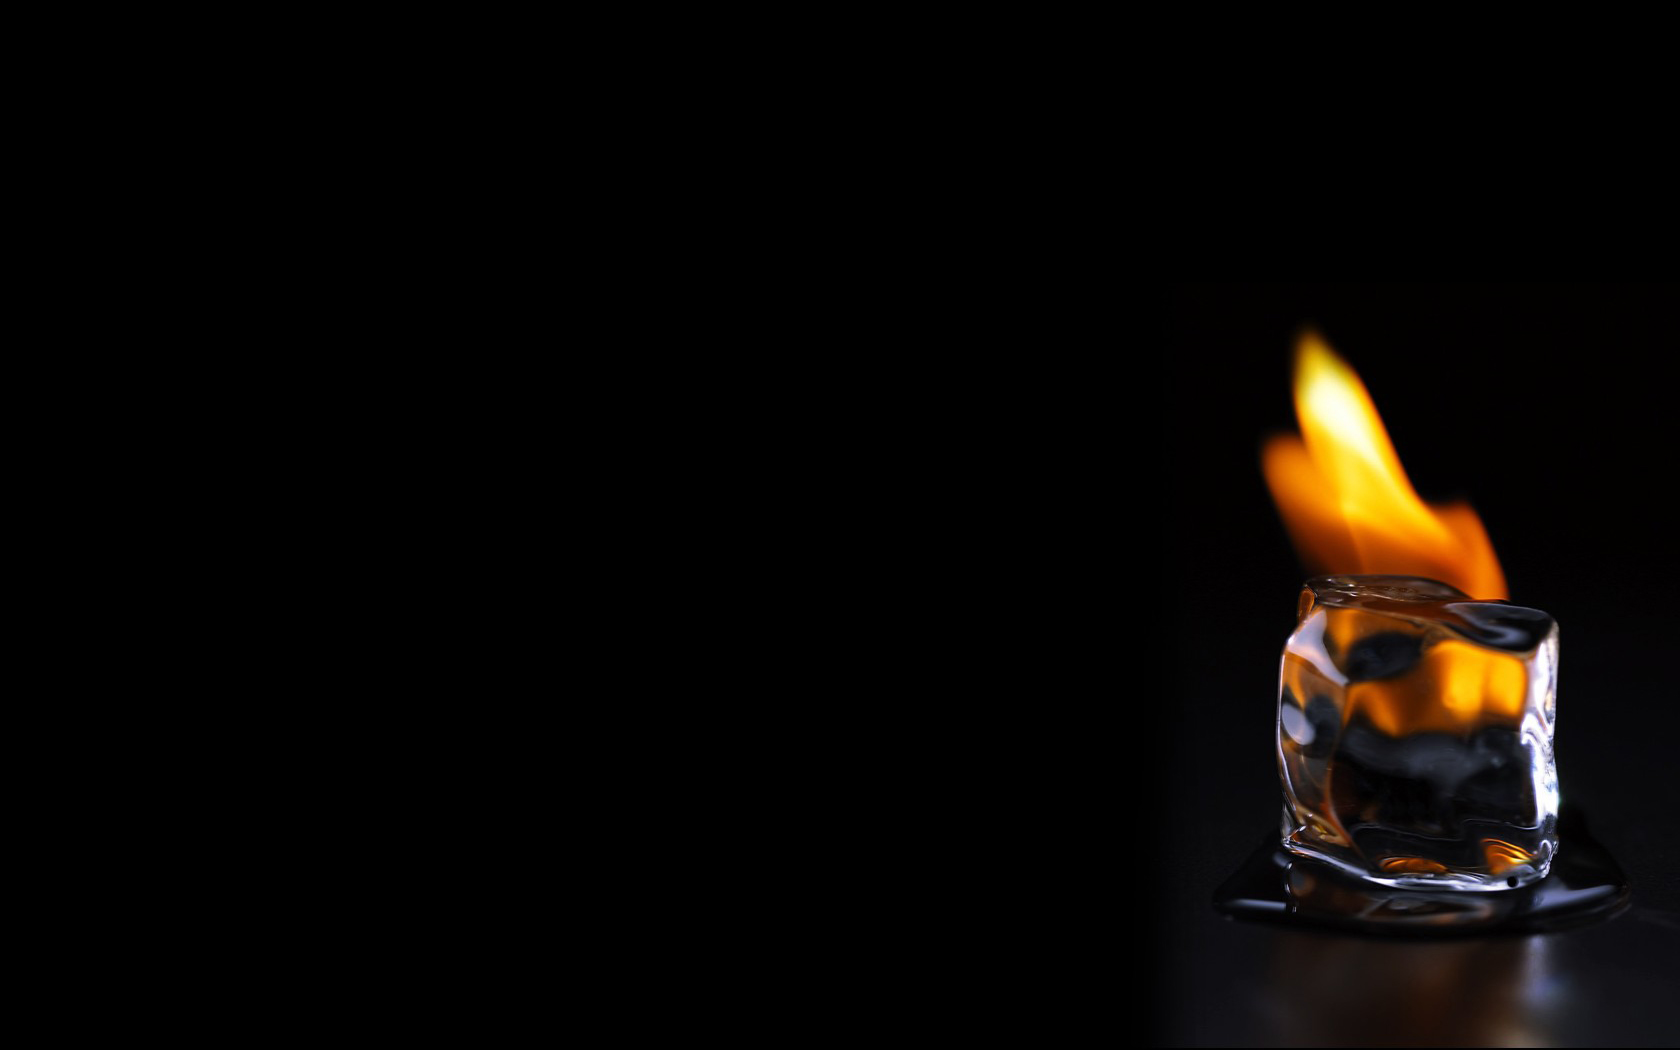 Fire Cool Background And Wallpaper For Your Desktop Or Laptop